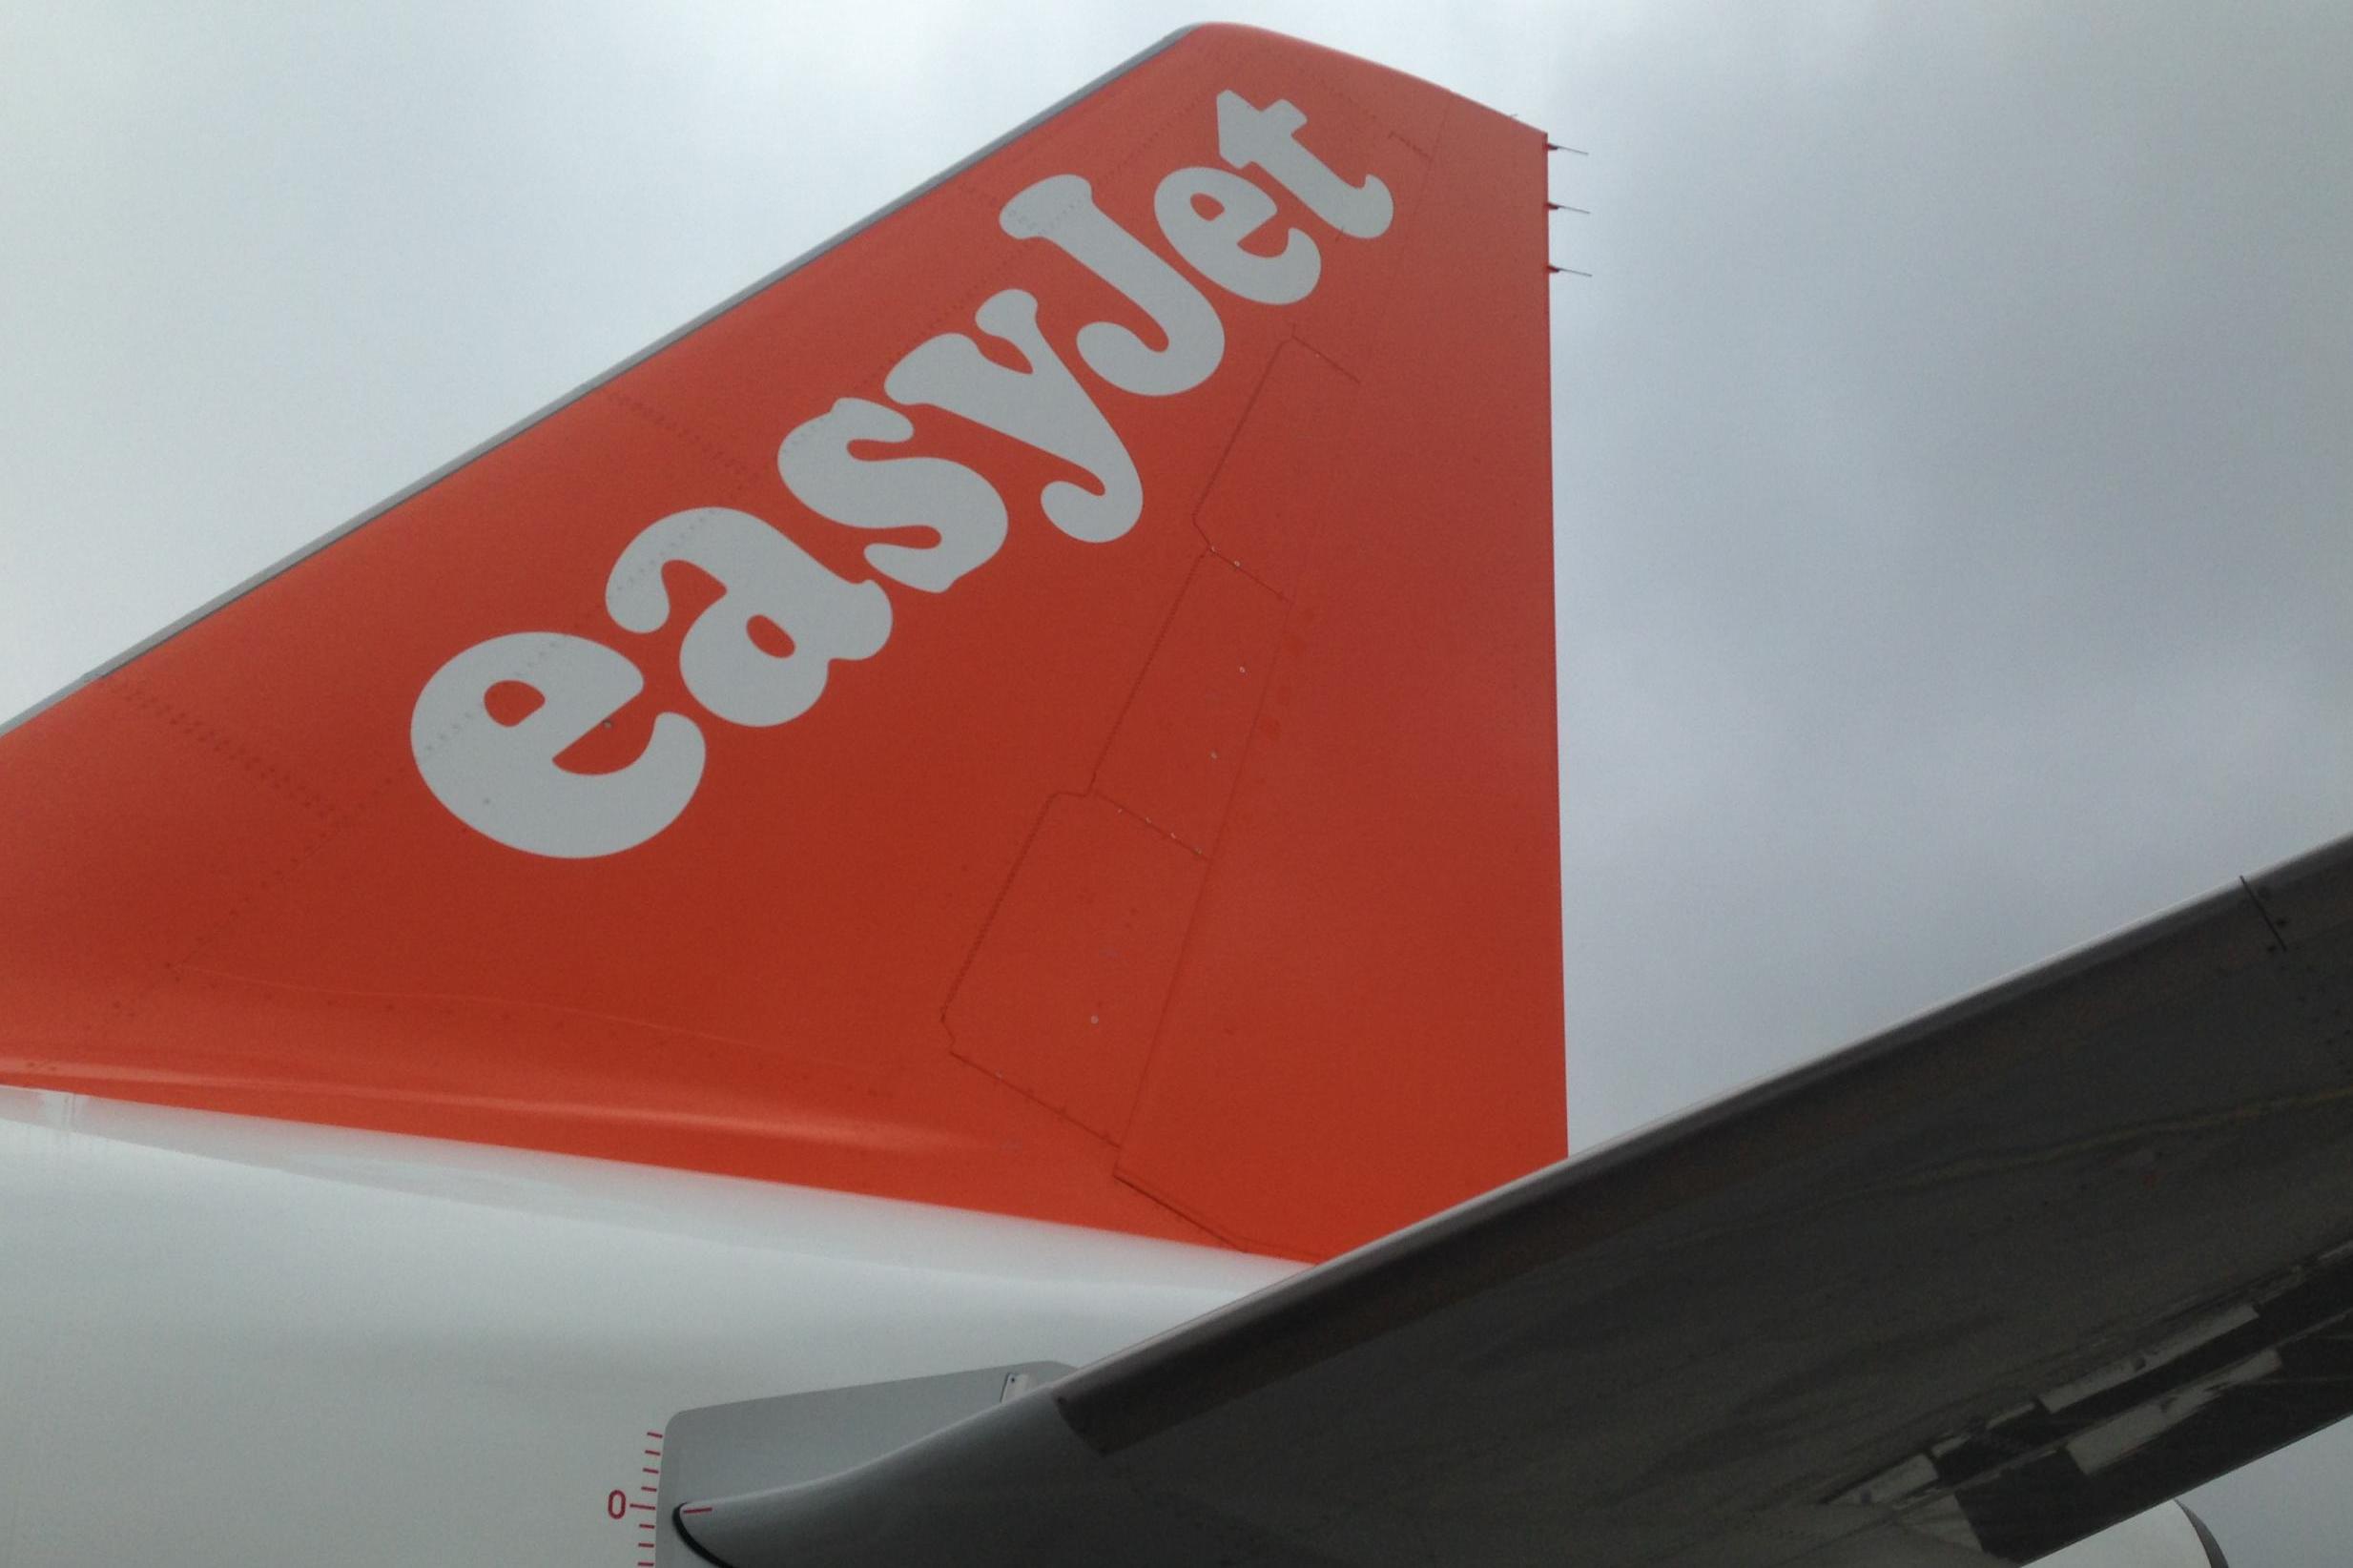 easyJet is set to roll out voice-activated technology for the booking process